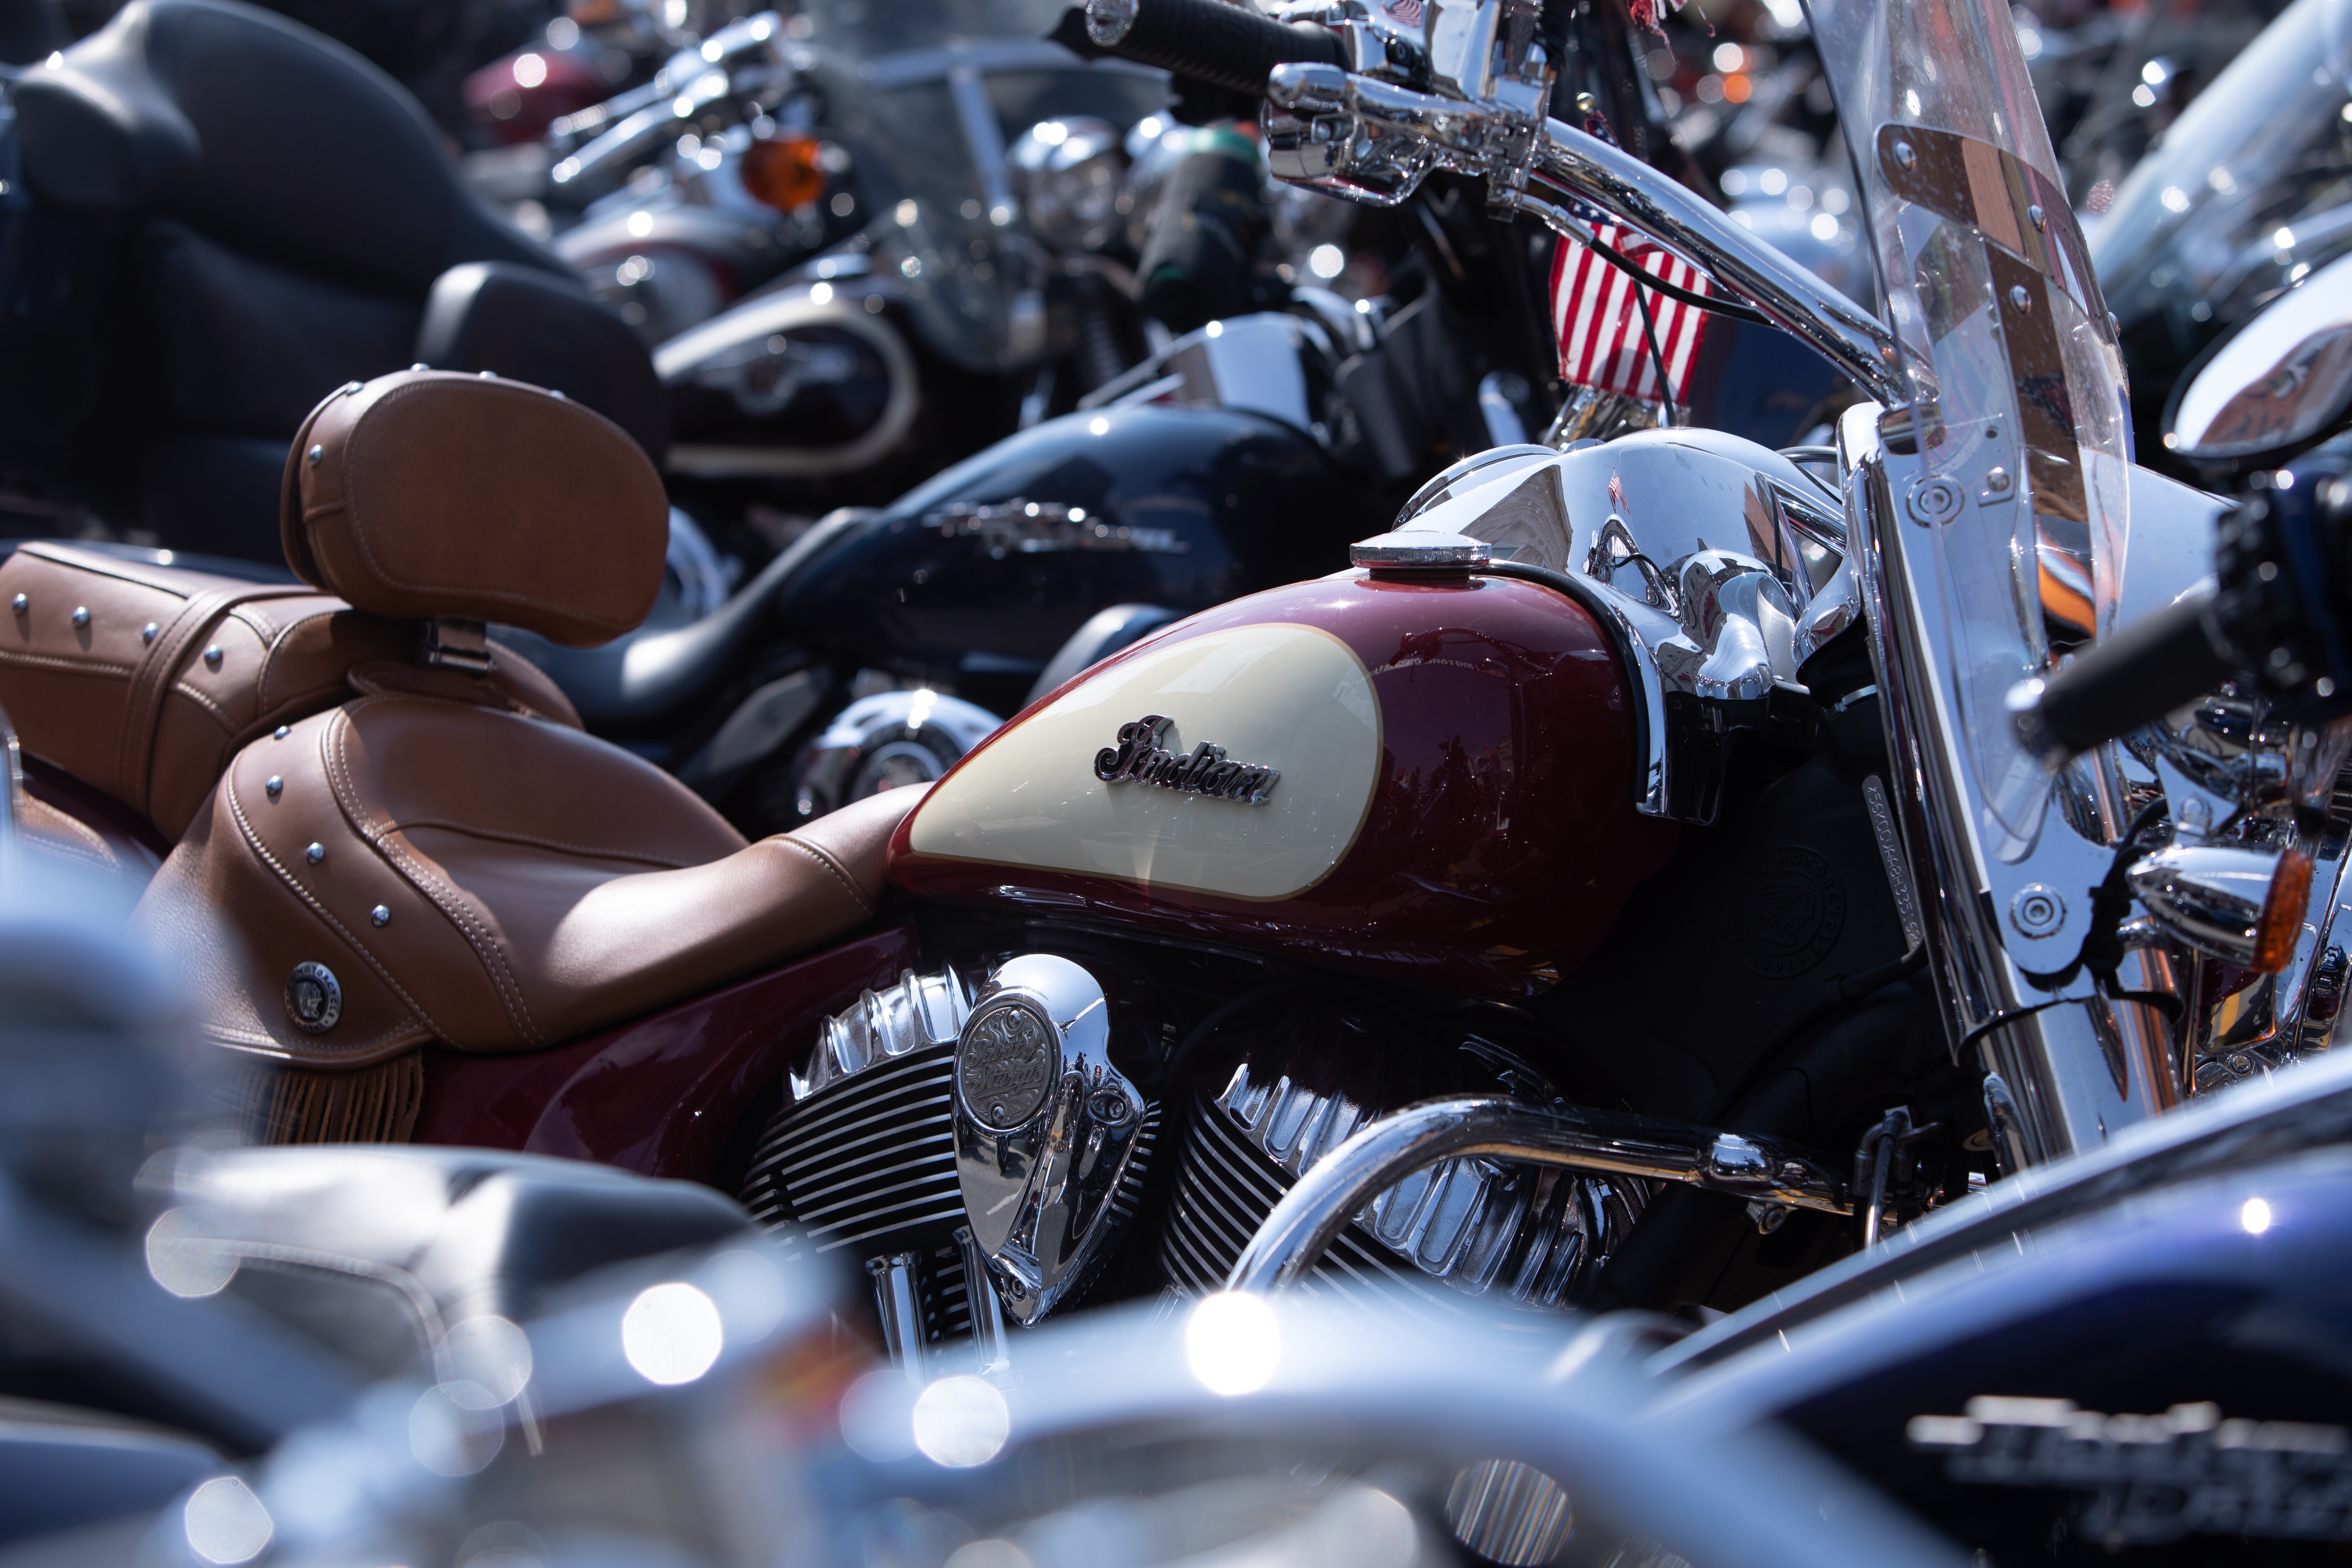 I Need to Sell My Indian Motorcycle, Where Can I Do It Online?